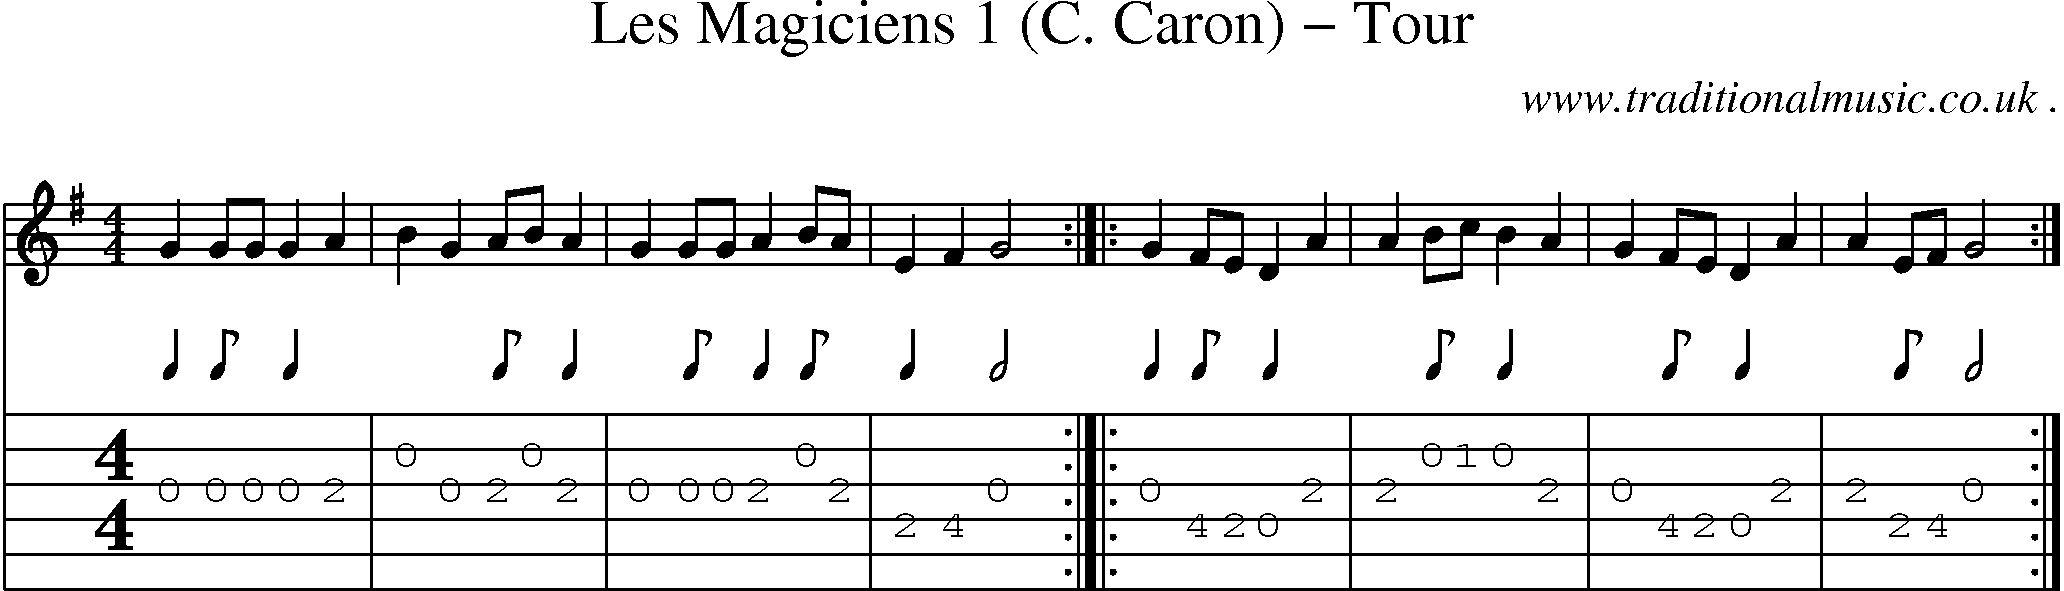 Sheet-Music and Guitar Tabs for Les Magiciens 1 (c Caron) Tour